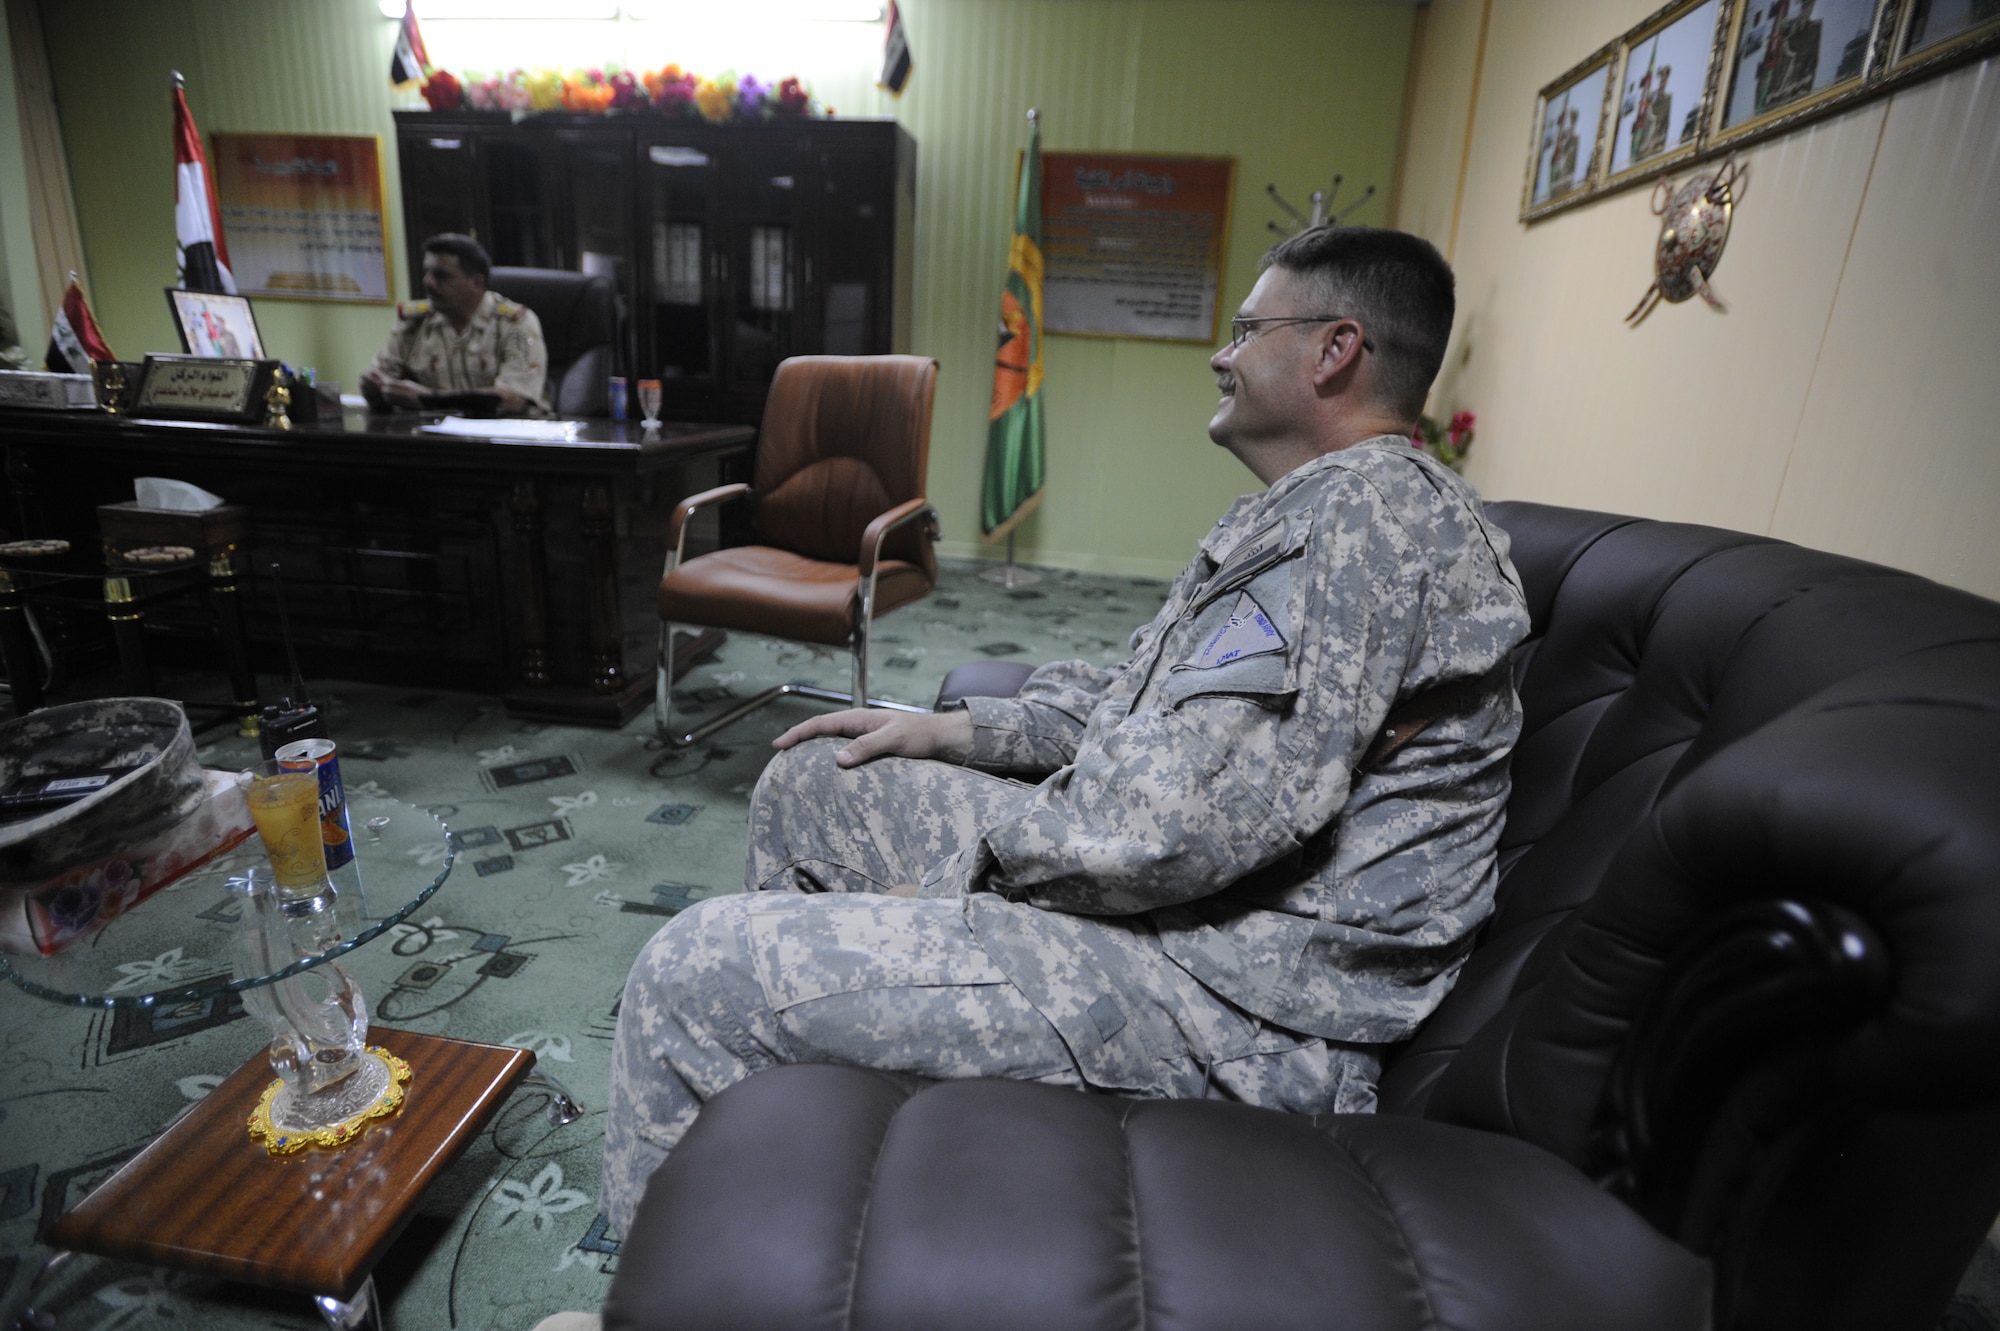 ALI BASE, Iraq - U.S. Air Force Lt. Col. Steven Ramsay, Logistics Military Advisory Team (LMAT) Senior Advisor, speaks with the Commander of the Officer Training School located on Camp Ur, an Iraqi military base Aug. 17, 2009.  Colonel Ramsay, deployed from Keesler Air Force Base, Miss., and his team advise the Iraqi military in base operations. (U.S. Air Force photo / Staff Sgt. Shawn Weismiller)